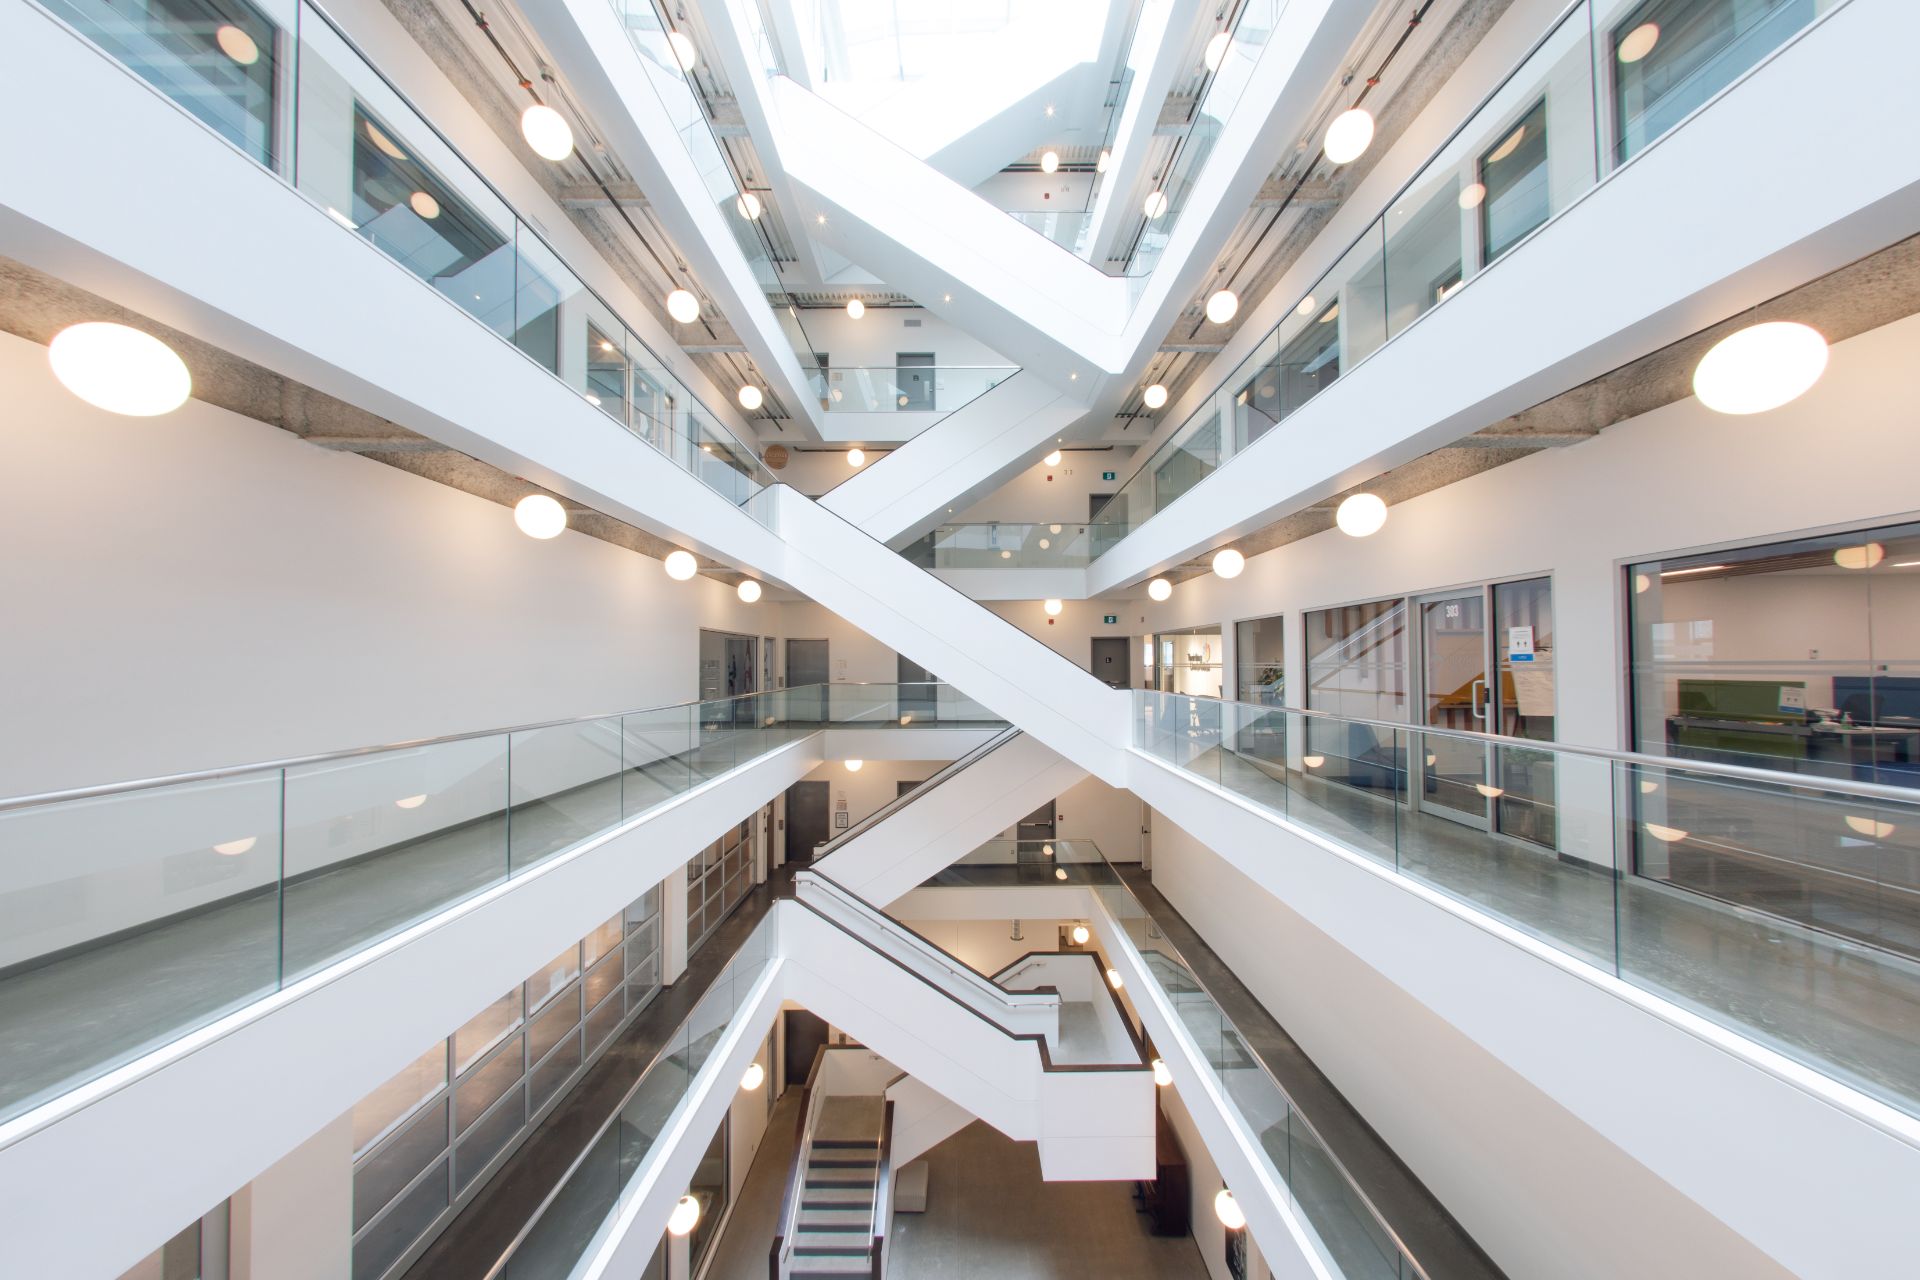 View of the open air staircase in the Innovation Centre in Kelowna from the third floor